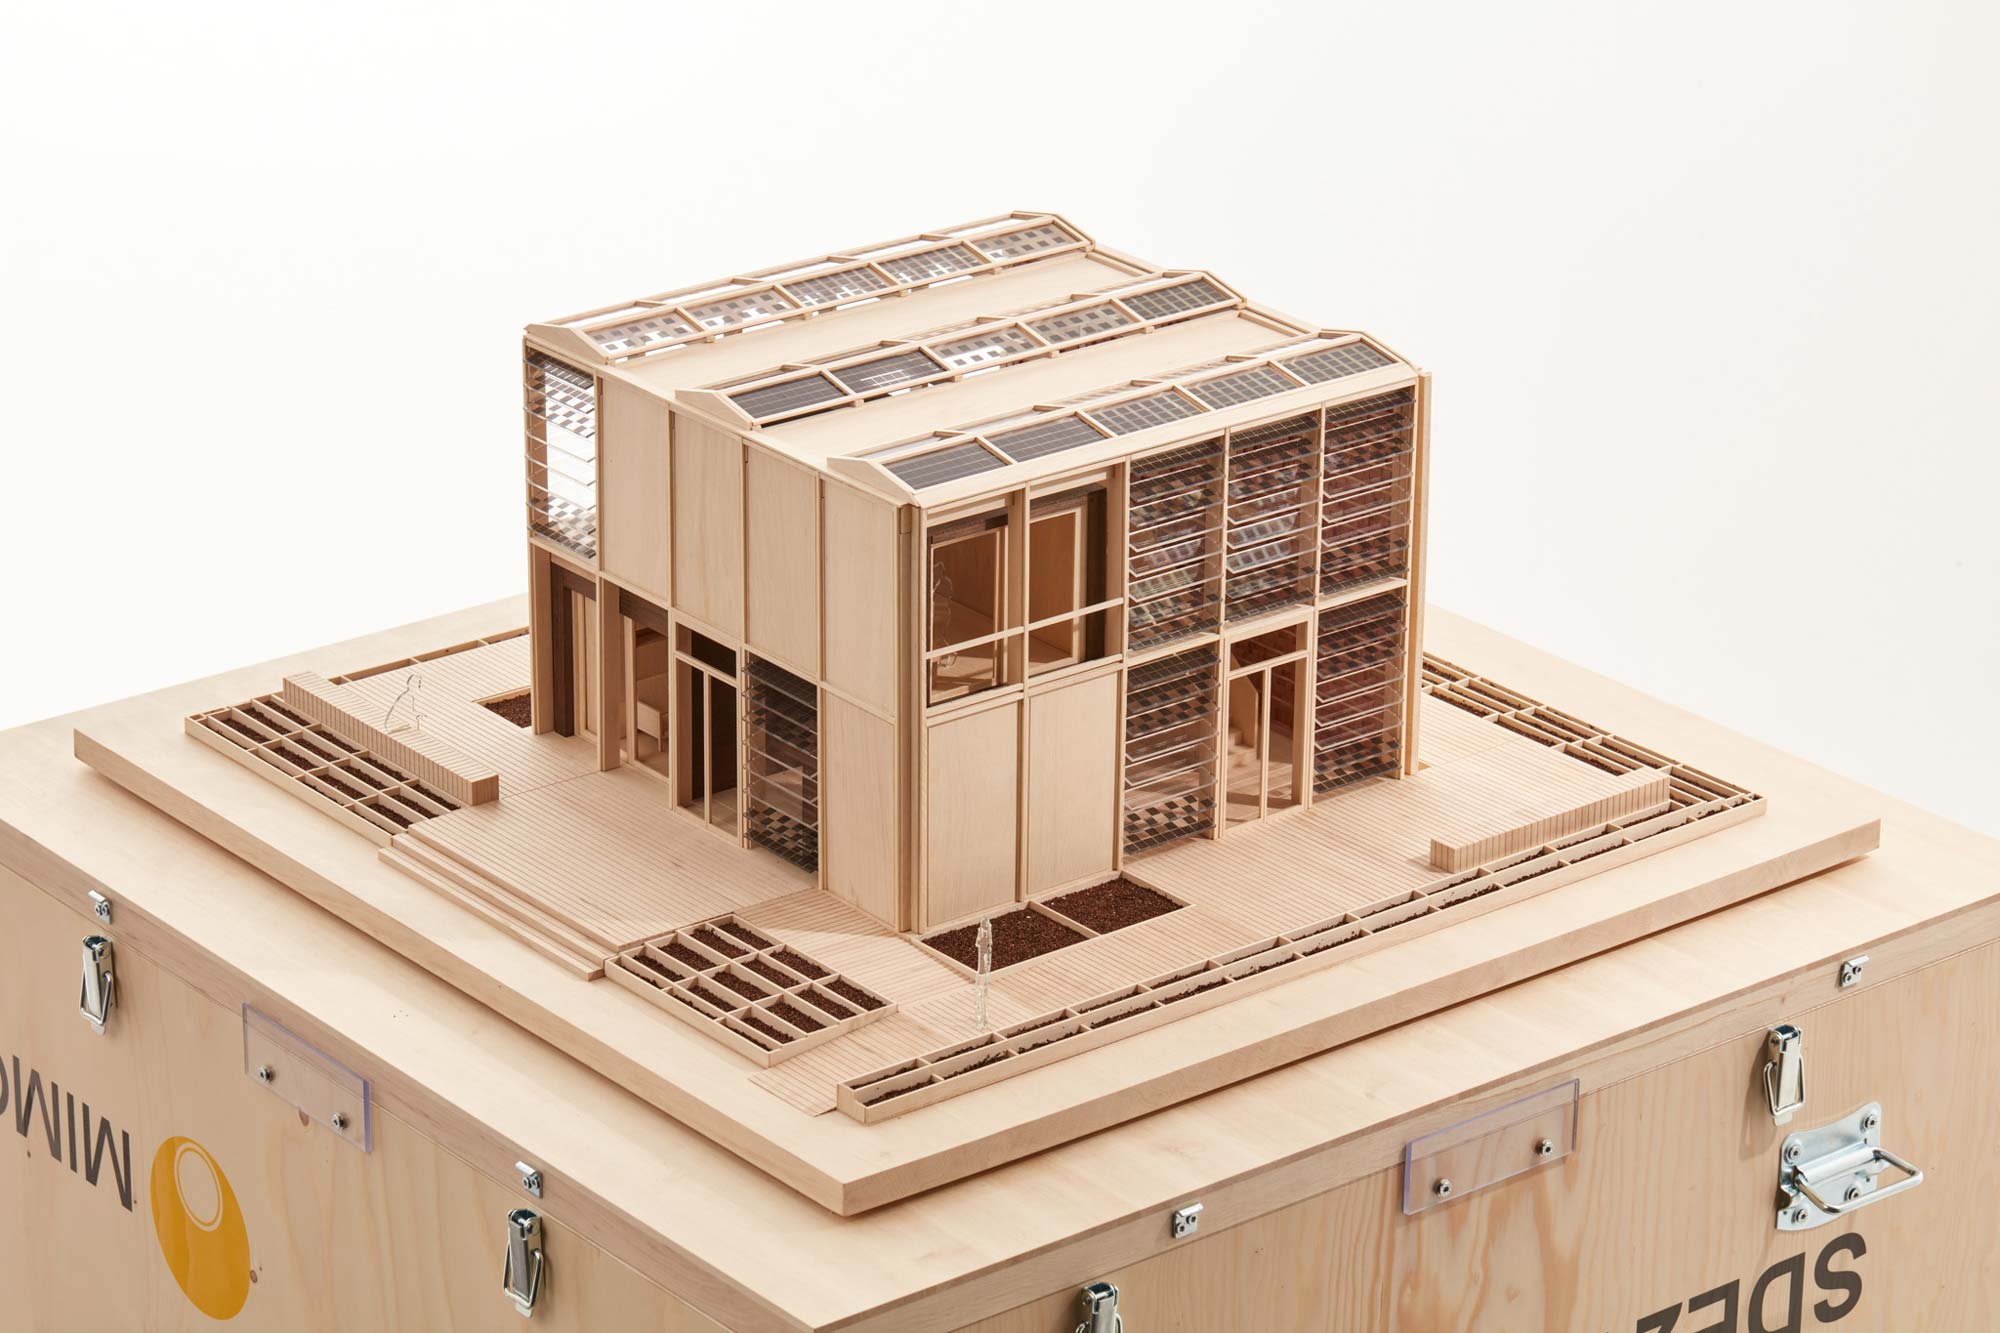 Wooden model of our House Demonstration Unit (HDU) on a scale of 1:20.